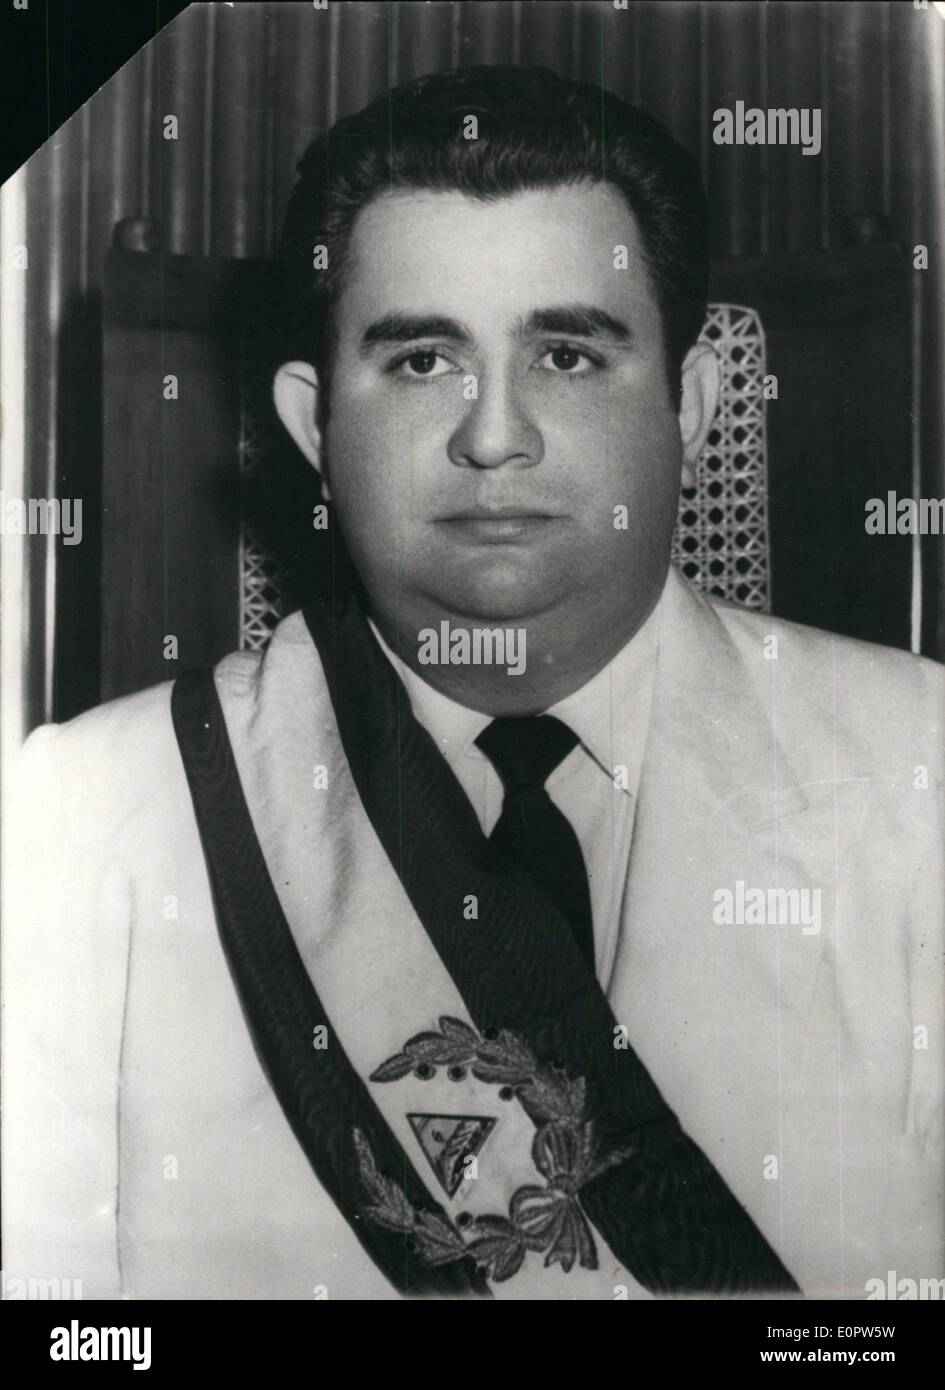 Jan. 01, 1957 - Luis Somoza elected President of Nicaragua: Photo shows a recent portrait or ''(illegible)'' Somo who has been elected President of Nicaragua. Stock Photo